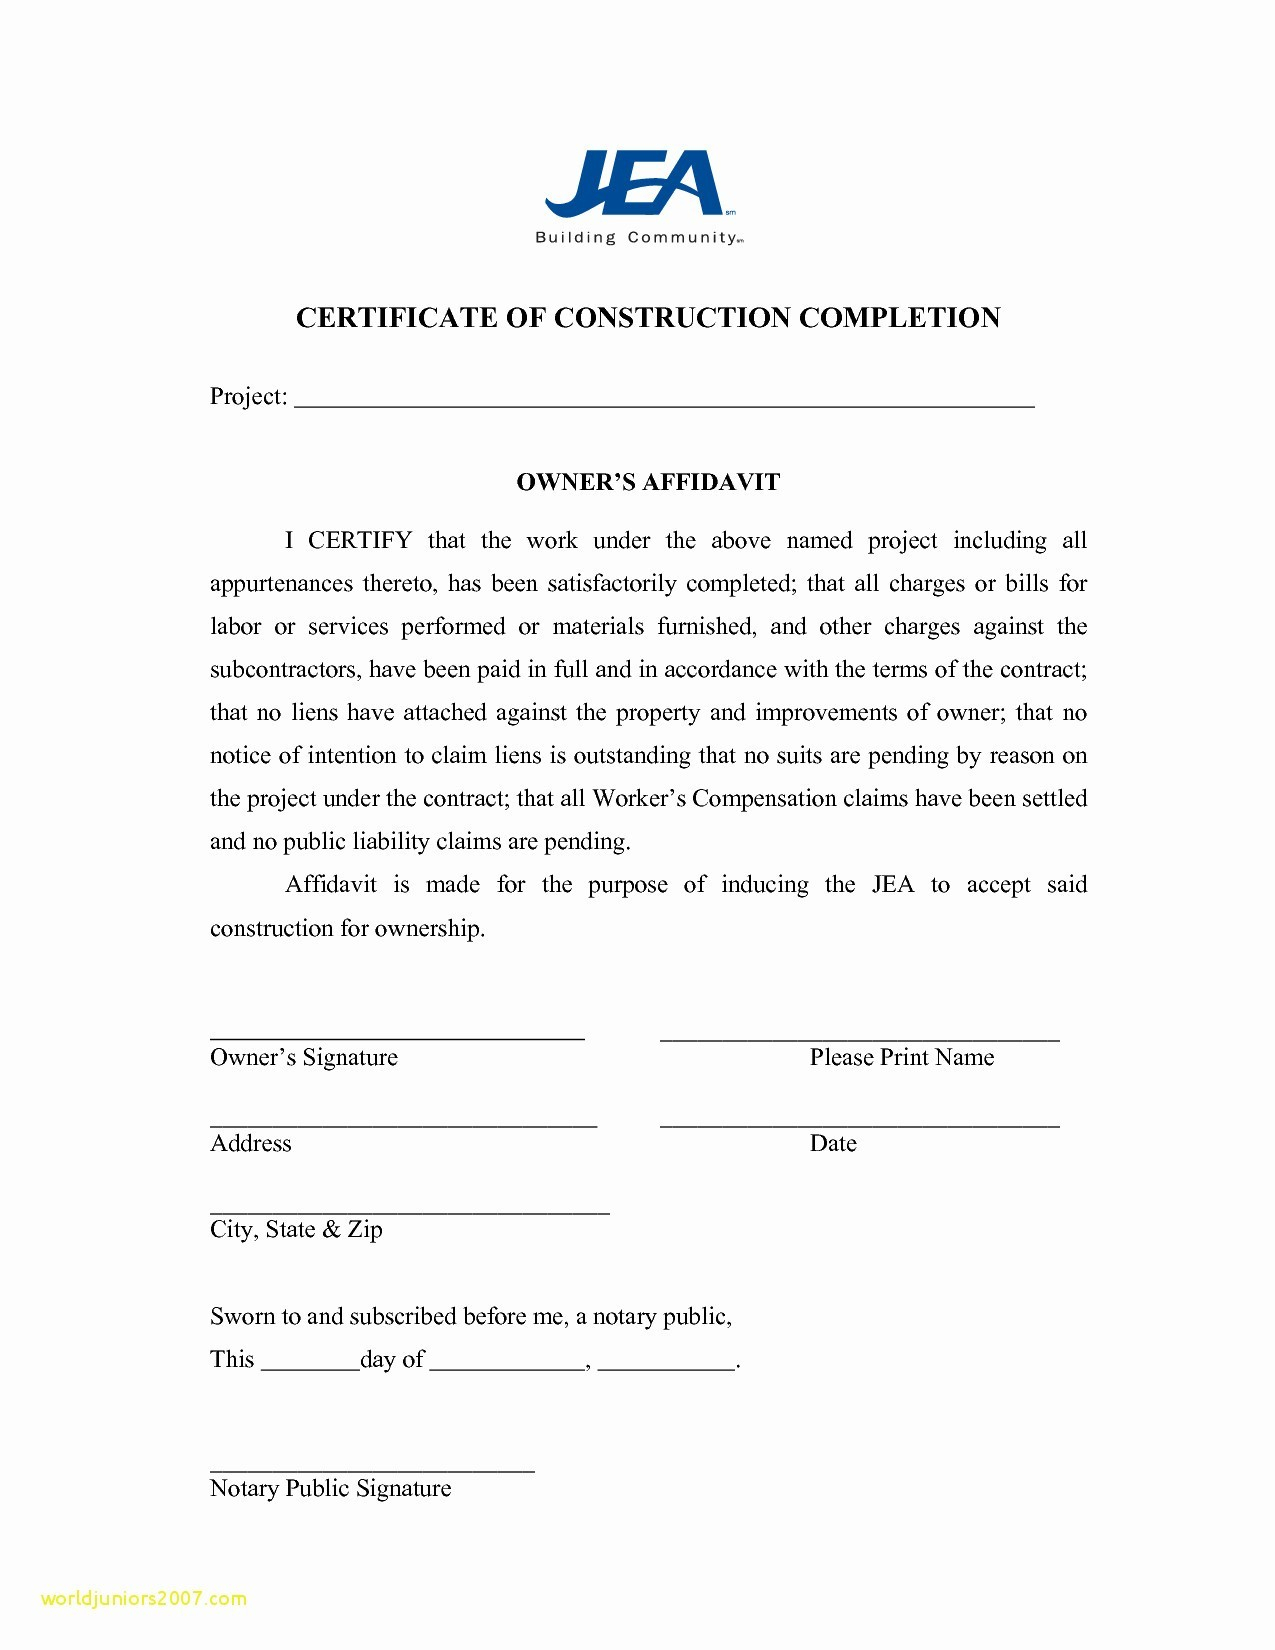 Letter Of Substantial Completion Template Examples | Letter With Regard To Jct Practical Completion Certificate Template